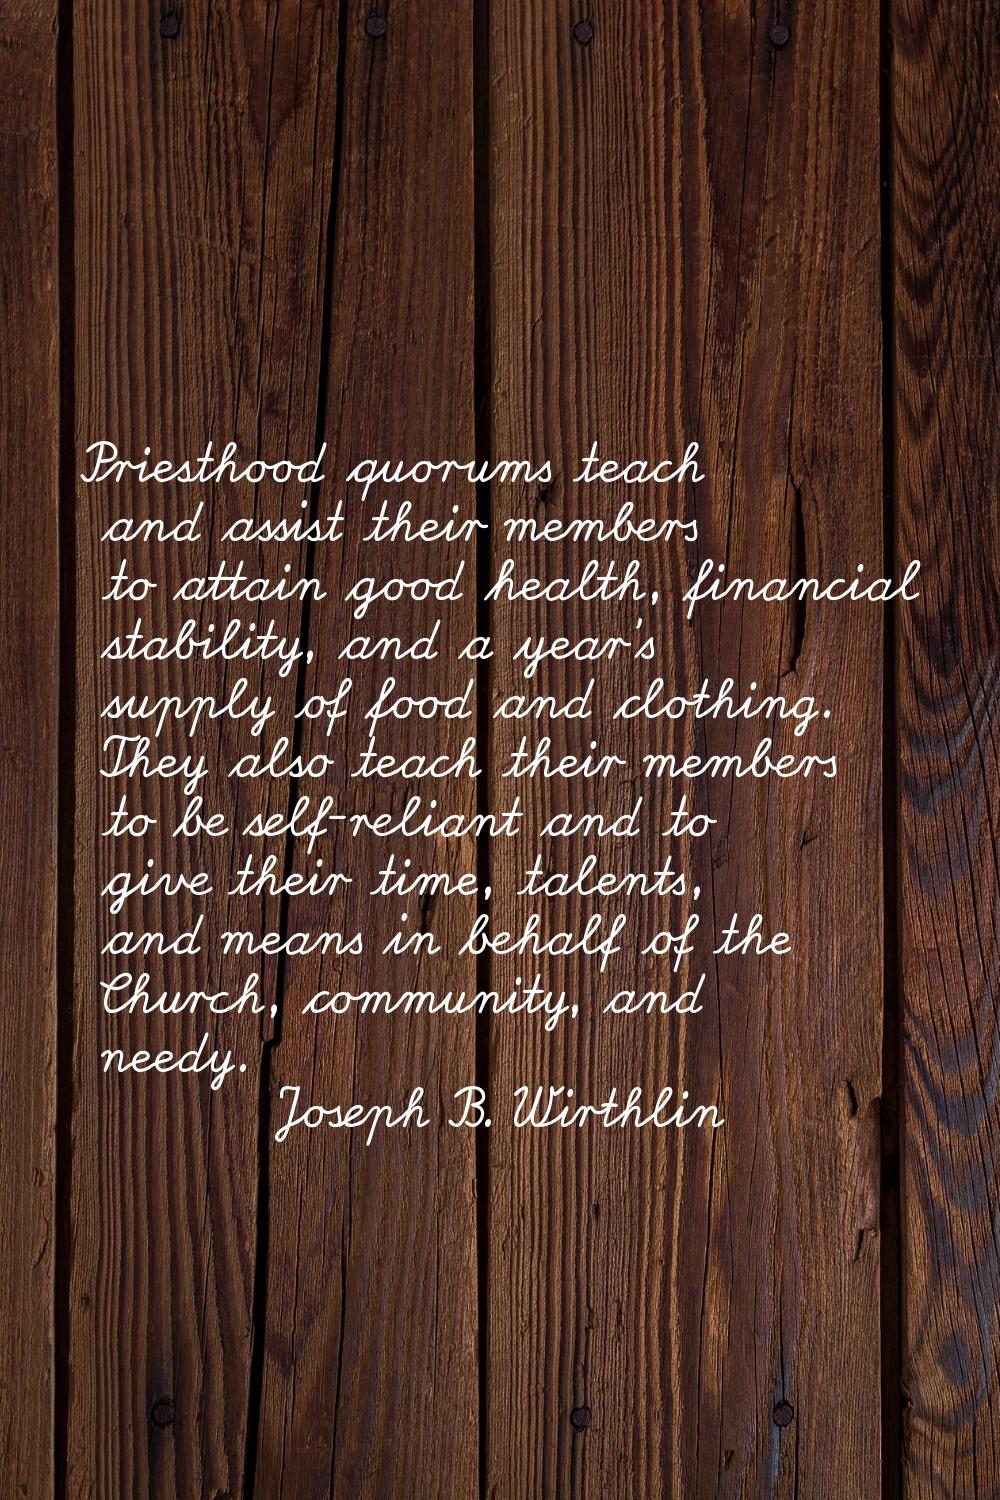 Priesthood quorums teach and assist their members to attain good health, financial stability, and a